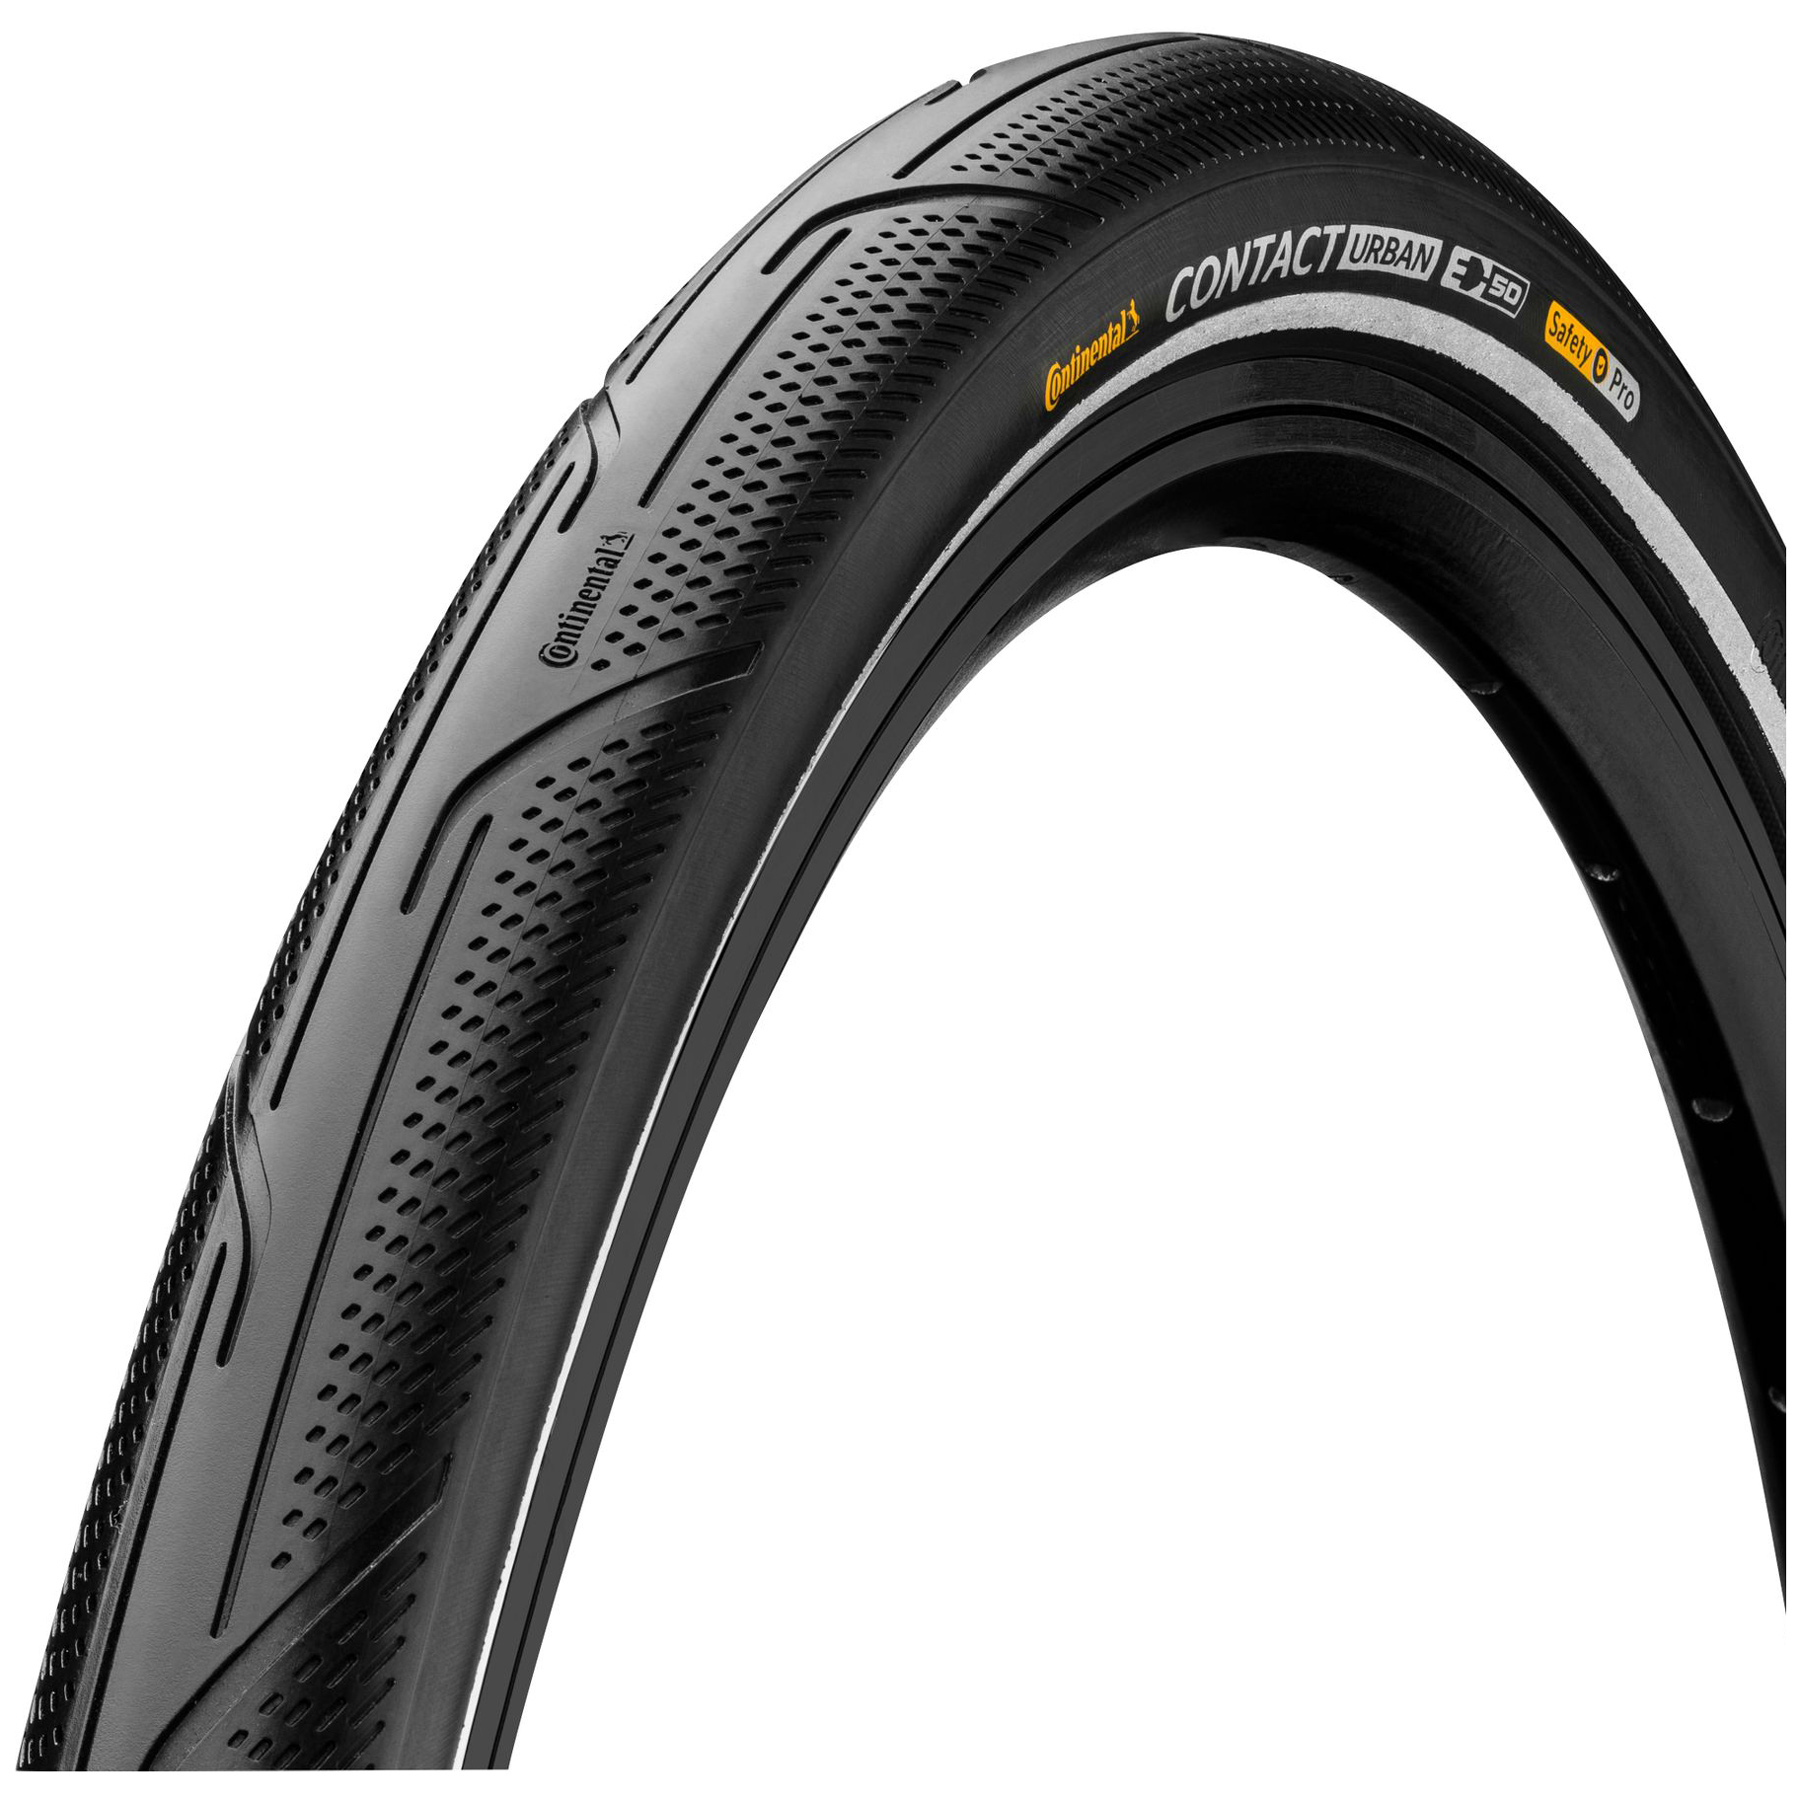 Image of Continental Contact Urban Wire Bead Tire - PureGrip | black reflective - ECE-R75 - 55-622